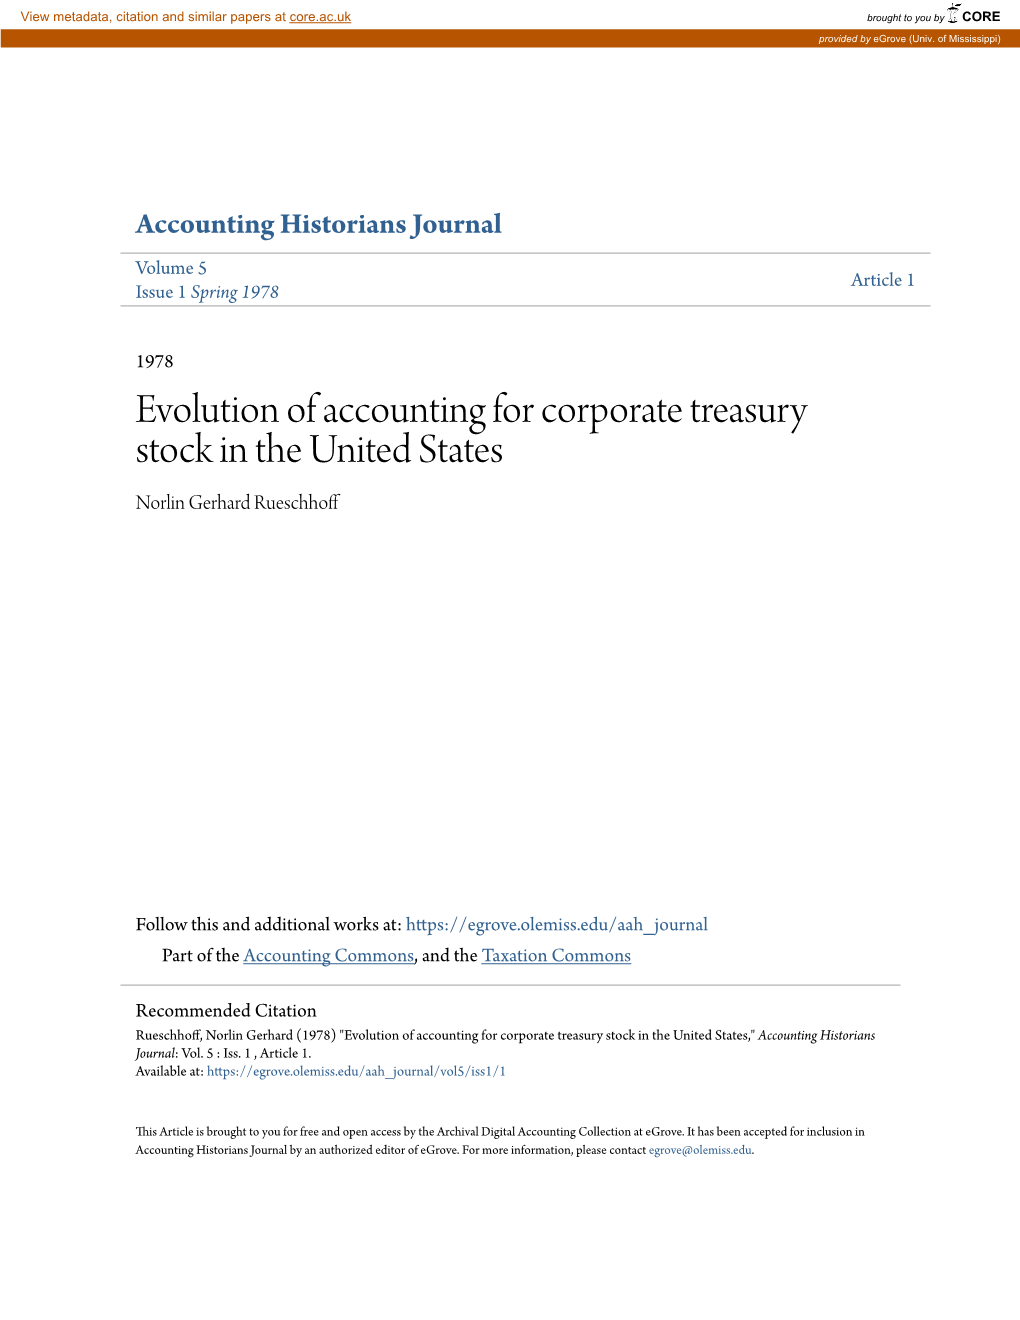 Evolution of Accounting for Corporate Treasury Stock in the United States Norlin Gerhard Rueschhoff